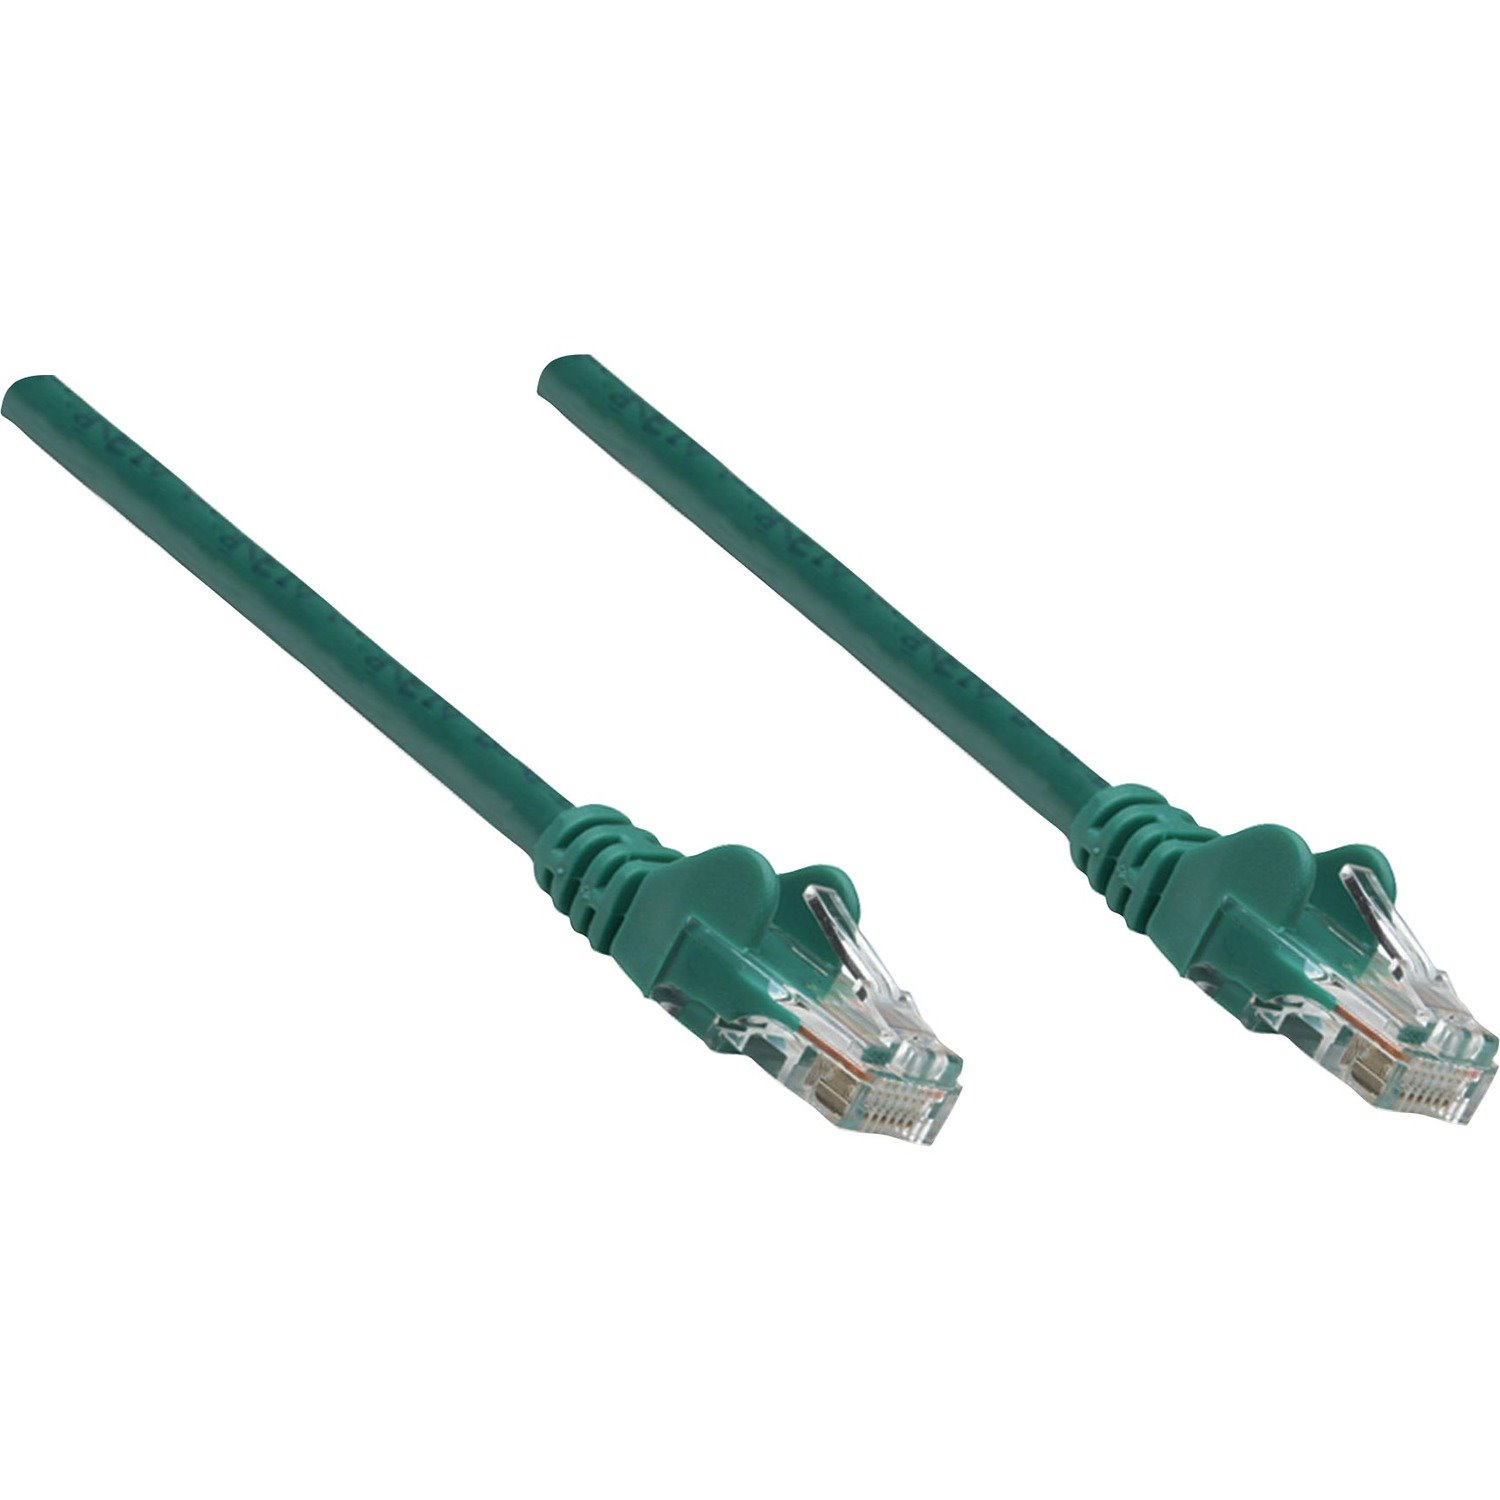 Intellinet 10 FT Green Cat5e Snagless Patch Cable